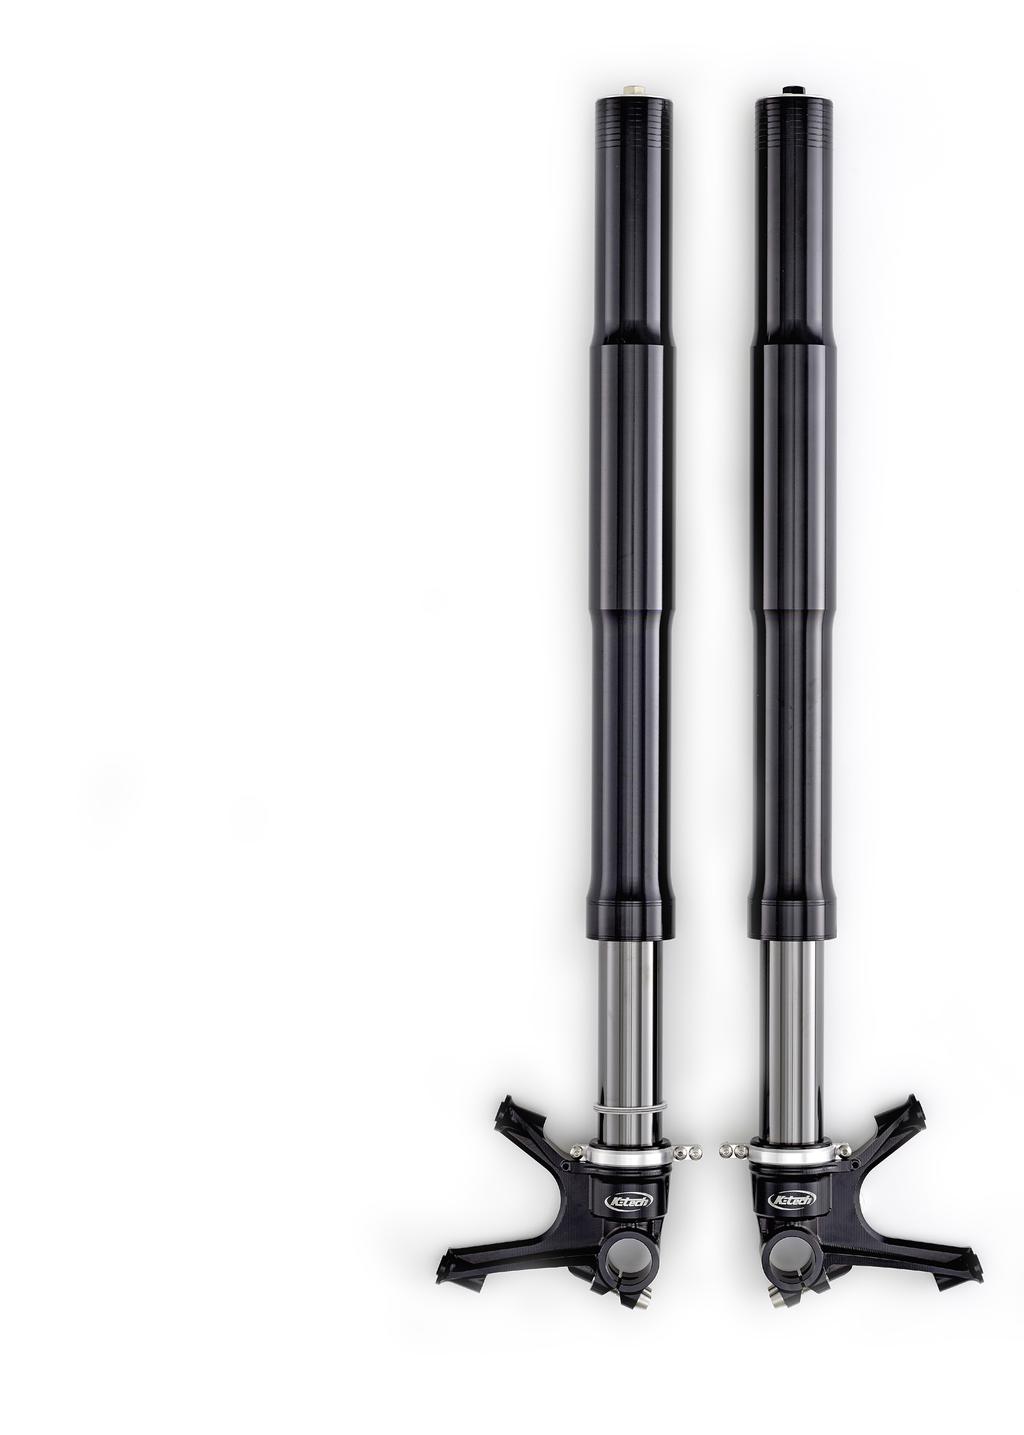 Specification The K-Tech KTR-4 Front Forks use the patent championship-winning DDS (Direct Damping System) technology, which has been designed to compete at the highest levels of motorcycle racing.